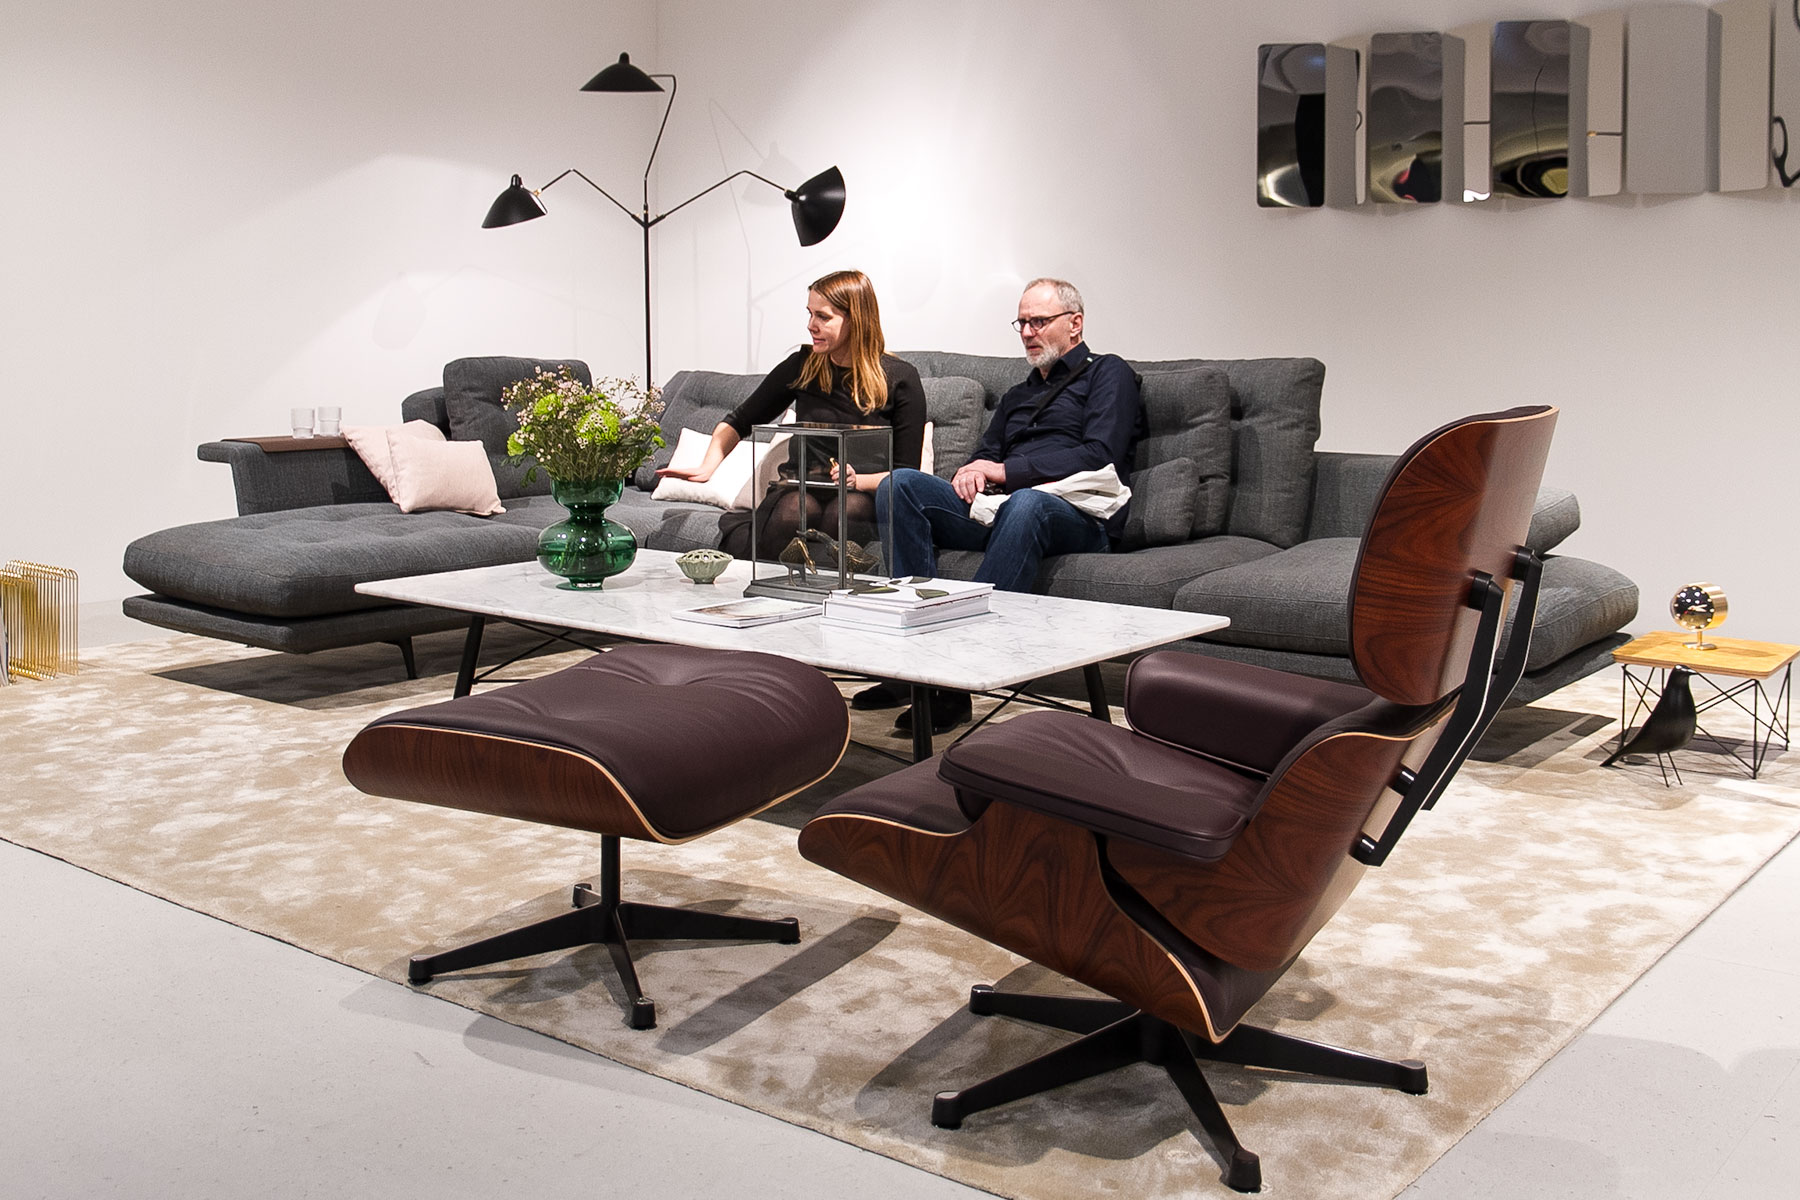 Grand Sofà grey by Antonio Citterio, Eames Lounge Chair brown, marble coffee table, stand exhibitor Vitra at imm cologne fair 2018, blog post lifetime-pieces.com